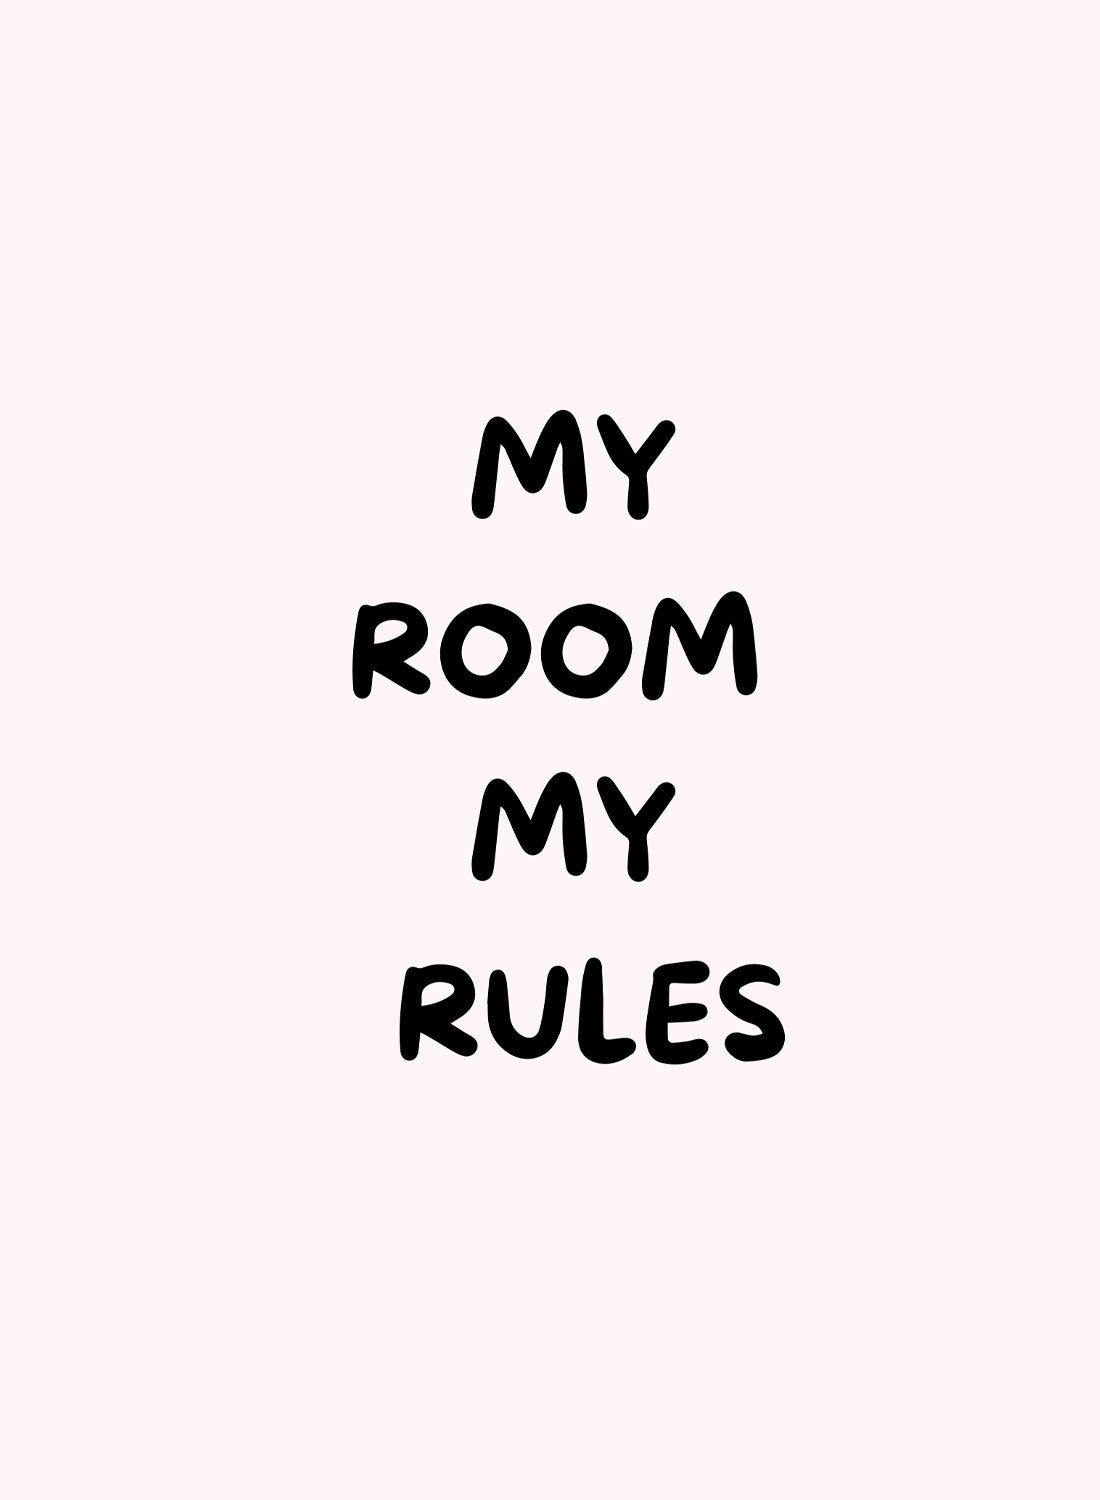 MY ROOM MY RULES